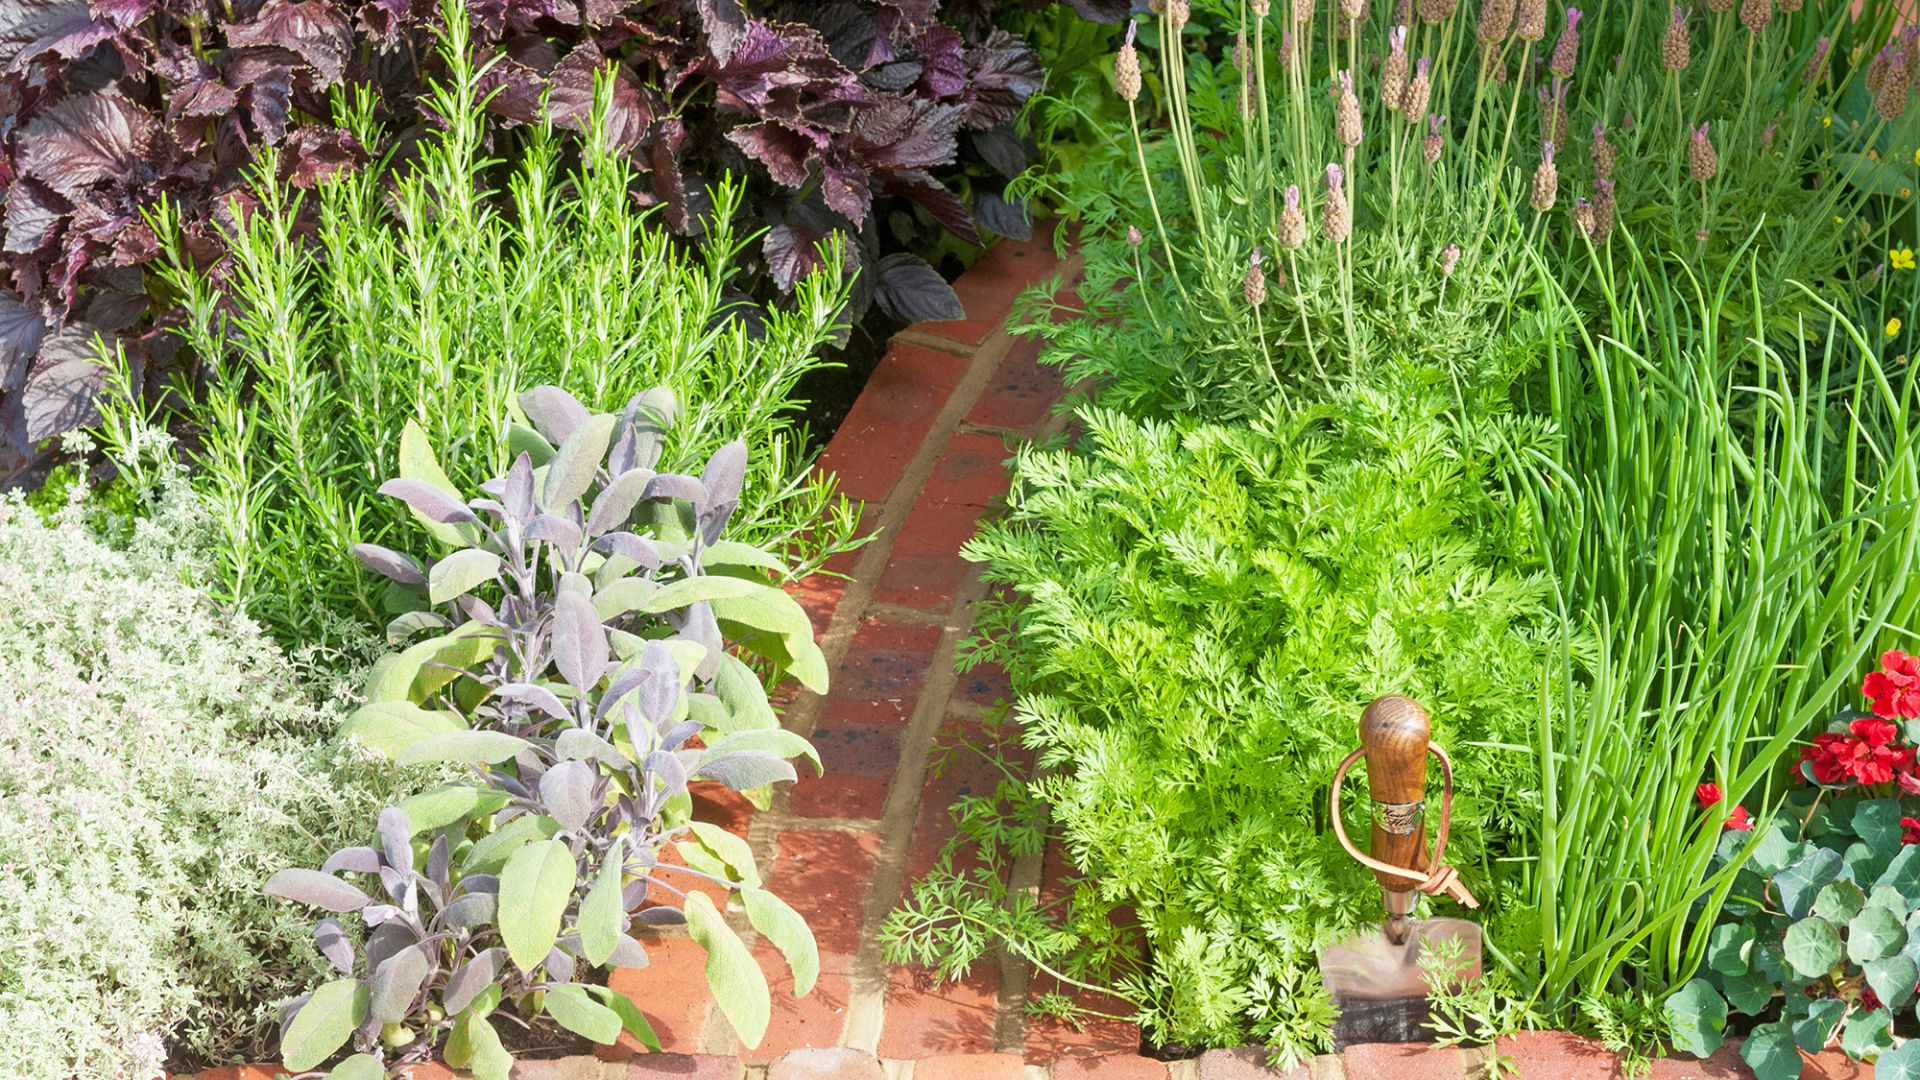 Herb garden ideas – 18 ways to grow an aromatic crop, indoors and outdoors